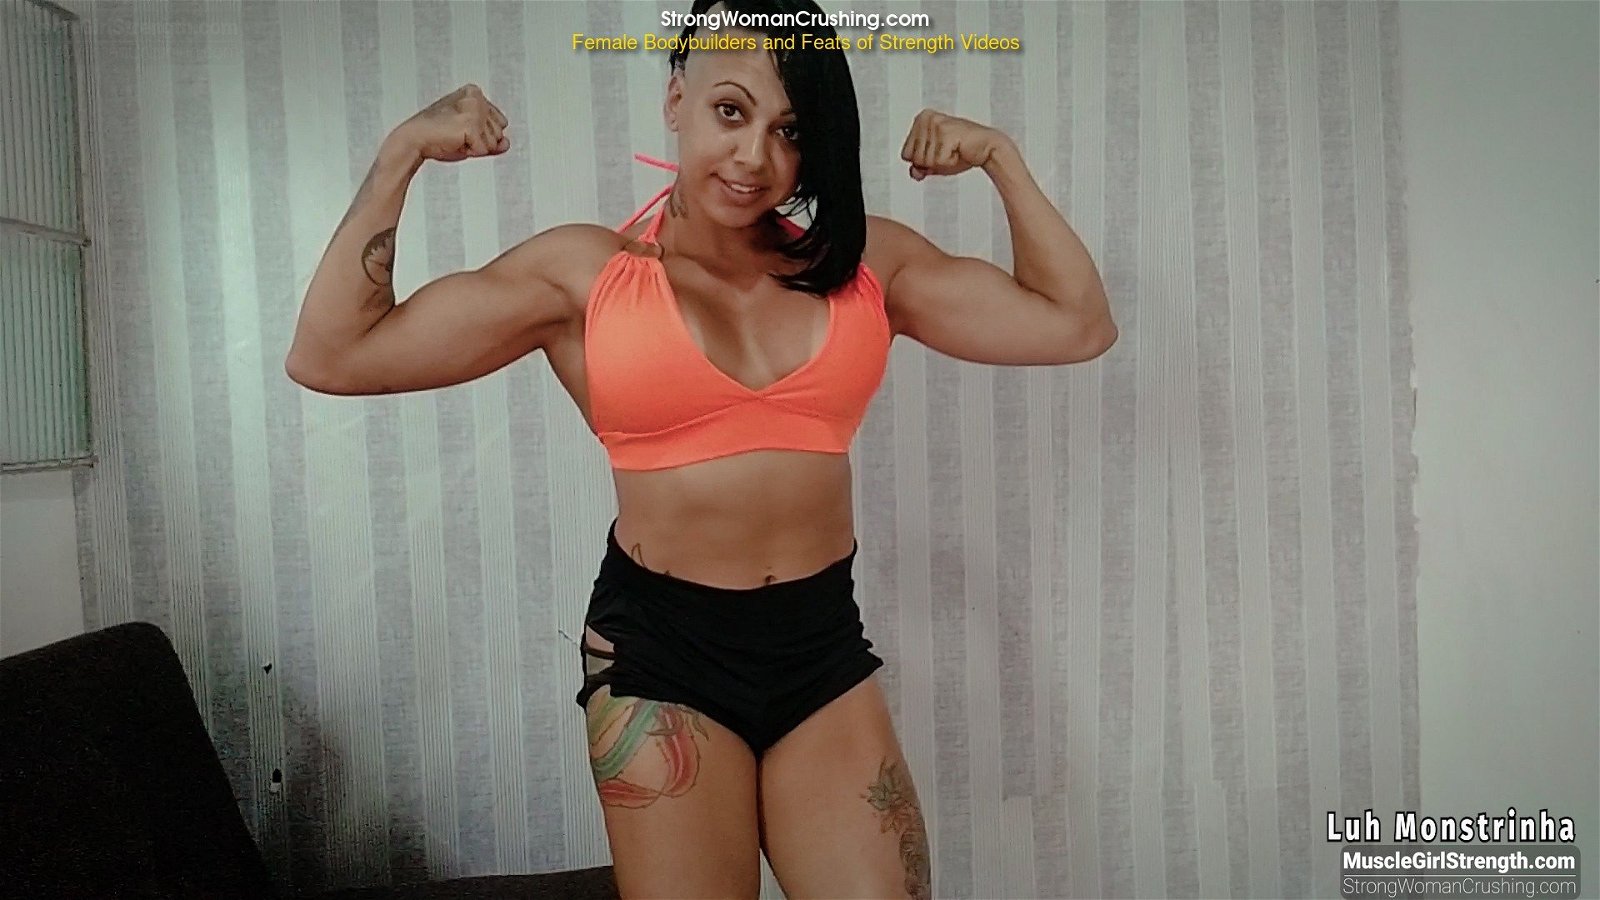 Photo by MusclegirlStrength with the username @MusclegirlStrength, who is a brand user,  May 7, 2024 at 10:56 PM and the text says 'Muscle Queen Crushes Pans: Insane Feats of Strength!: https://www.strongwomancrushing.com/

#musclegirl #musclegirllove #femalemuscle #femalemuscles #featsofstrength #musclebeauty #strengthqueen #flexfriday'